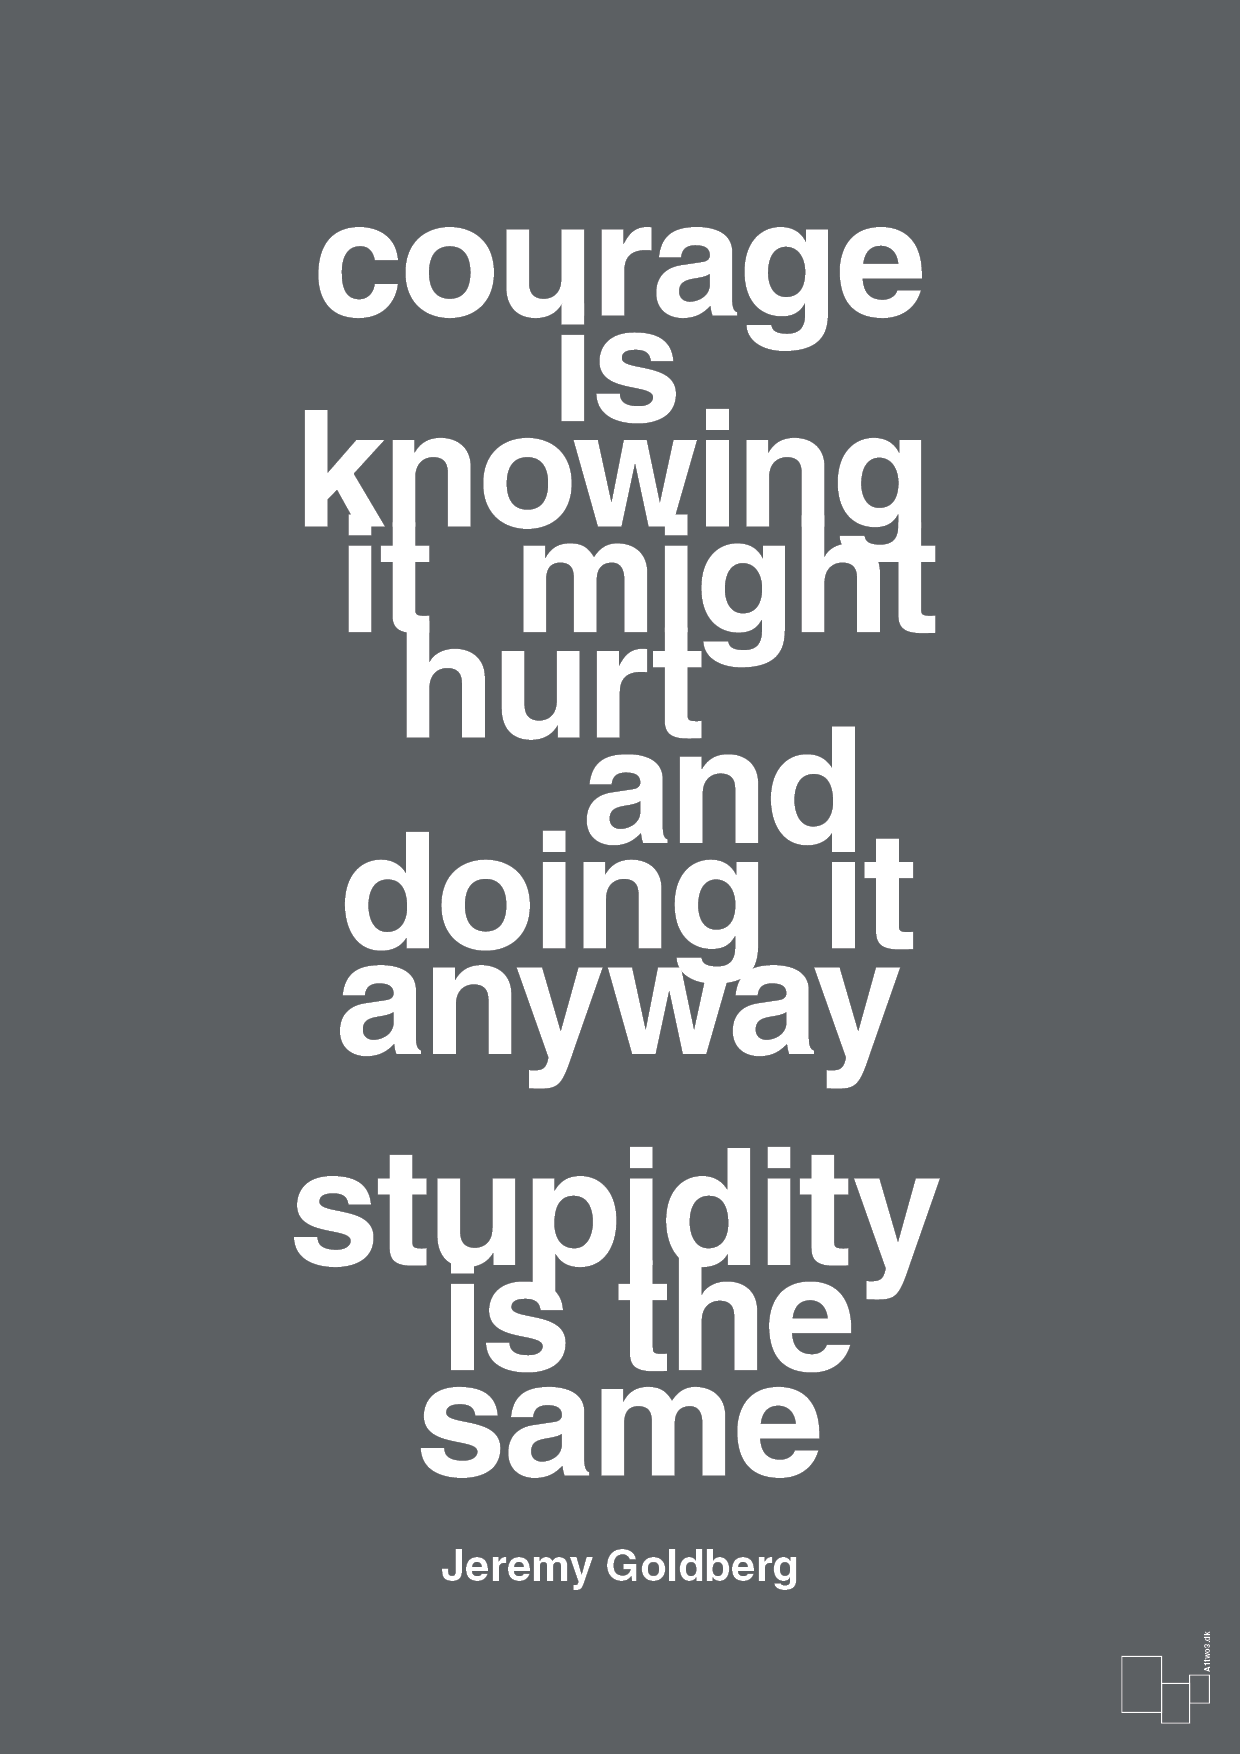 courage is knowing it might hurt and doing it anyway stupidity is the same - Plakat med Citater i Graphic Charcoal